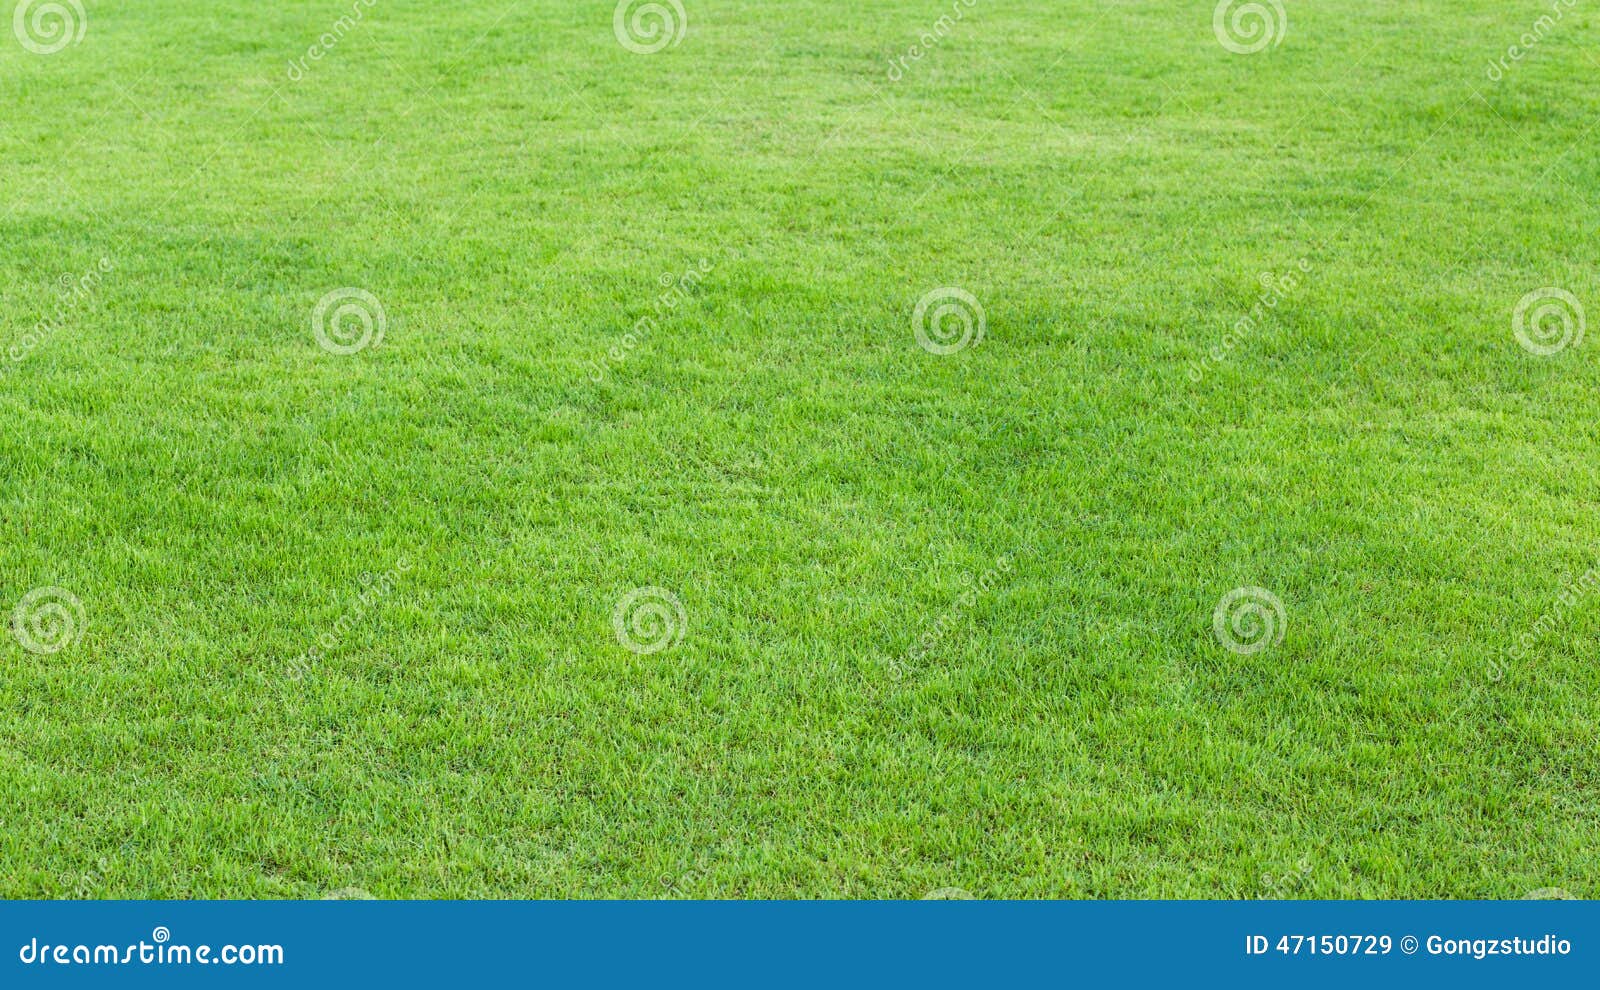 Green Grass Field Background Stock Image - Image of land, meadow: 47150729